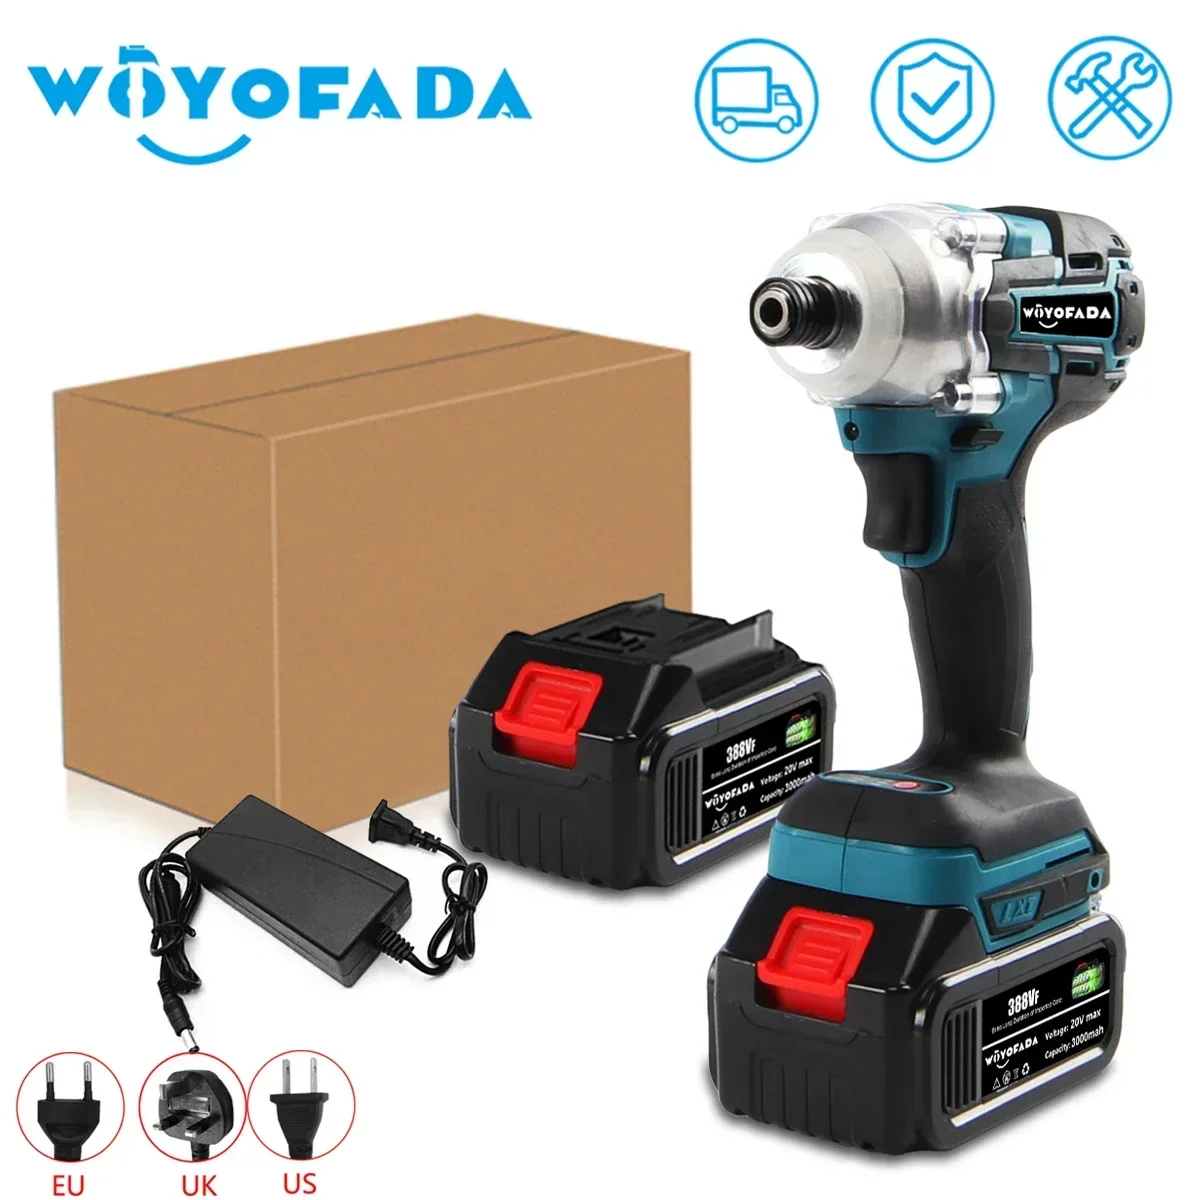 18V 350Nm Brushless Drill Cordless Electric Impact Wrench Rechargeable 1/4 Square Drive Wrench DIY Power Tool For Makita Battery powerful handbike for wheelchair drive power systems 36v 350w 12 inch 13ah battery